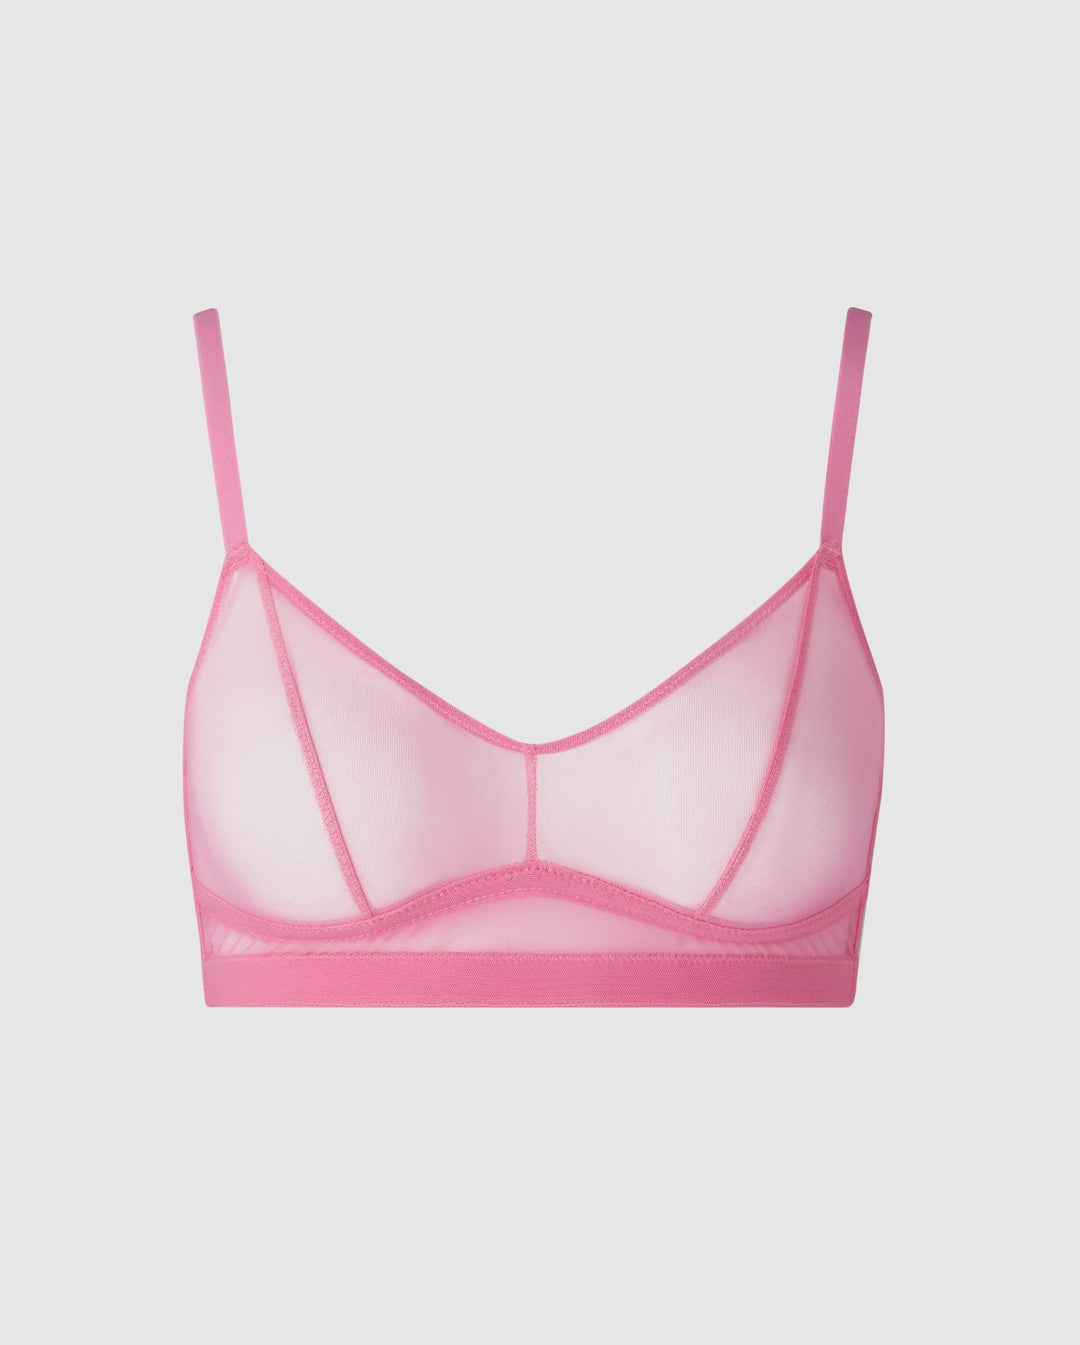 Mesh Balconette Candy Pink